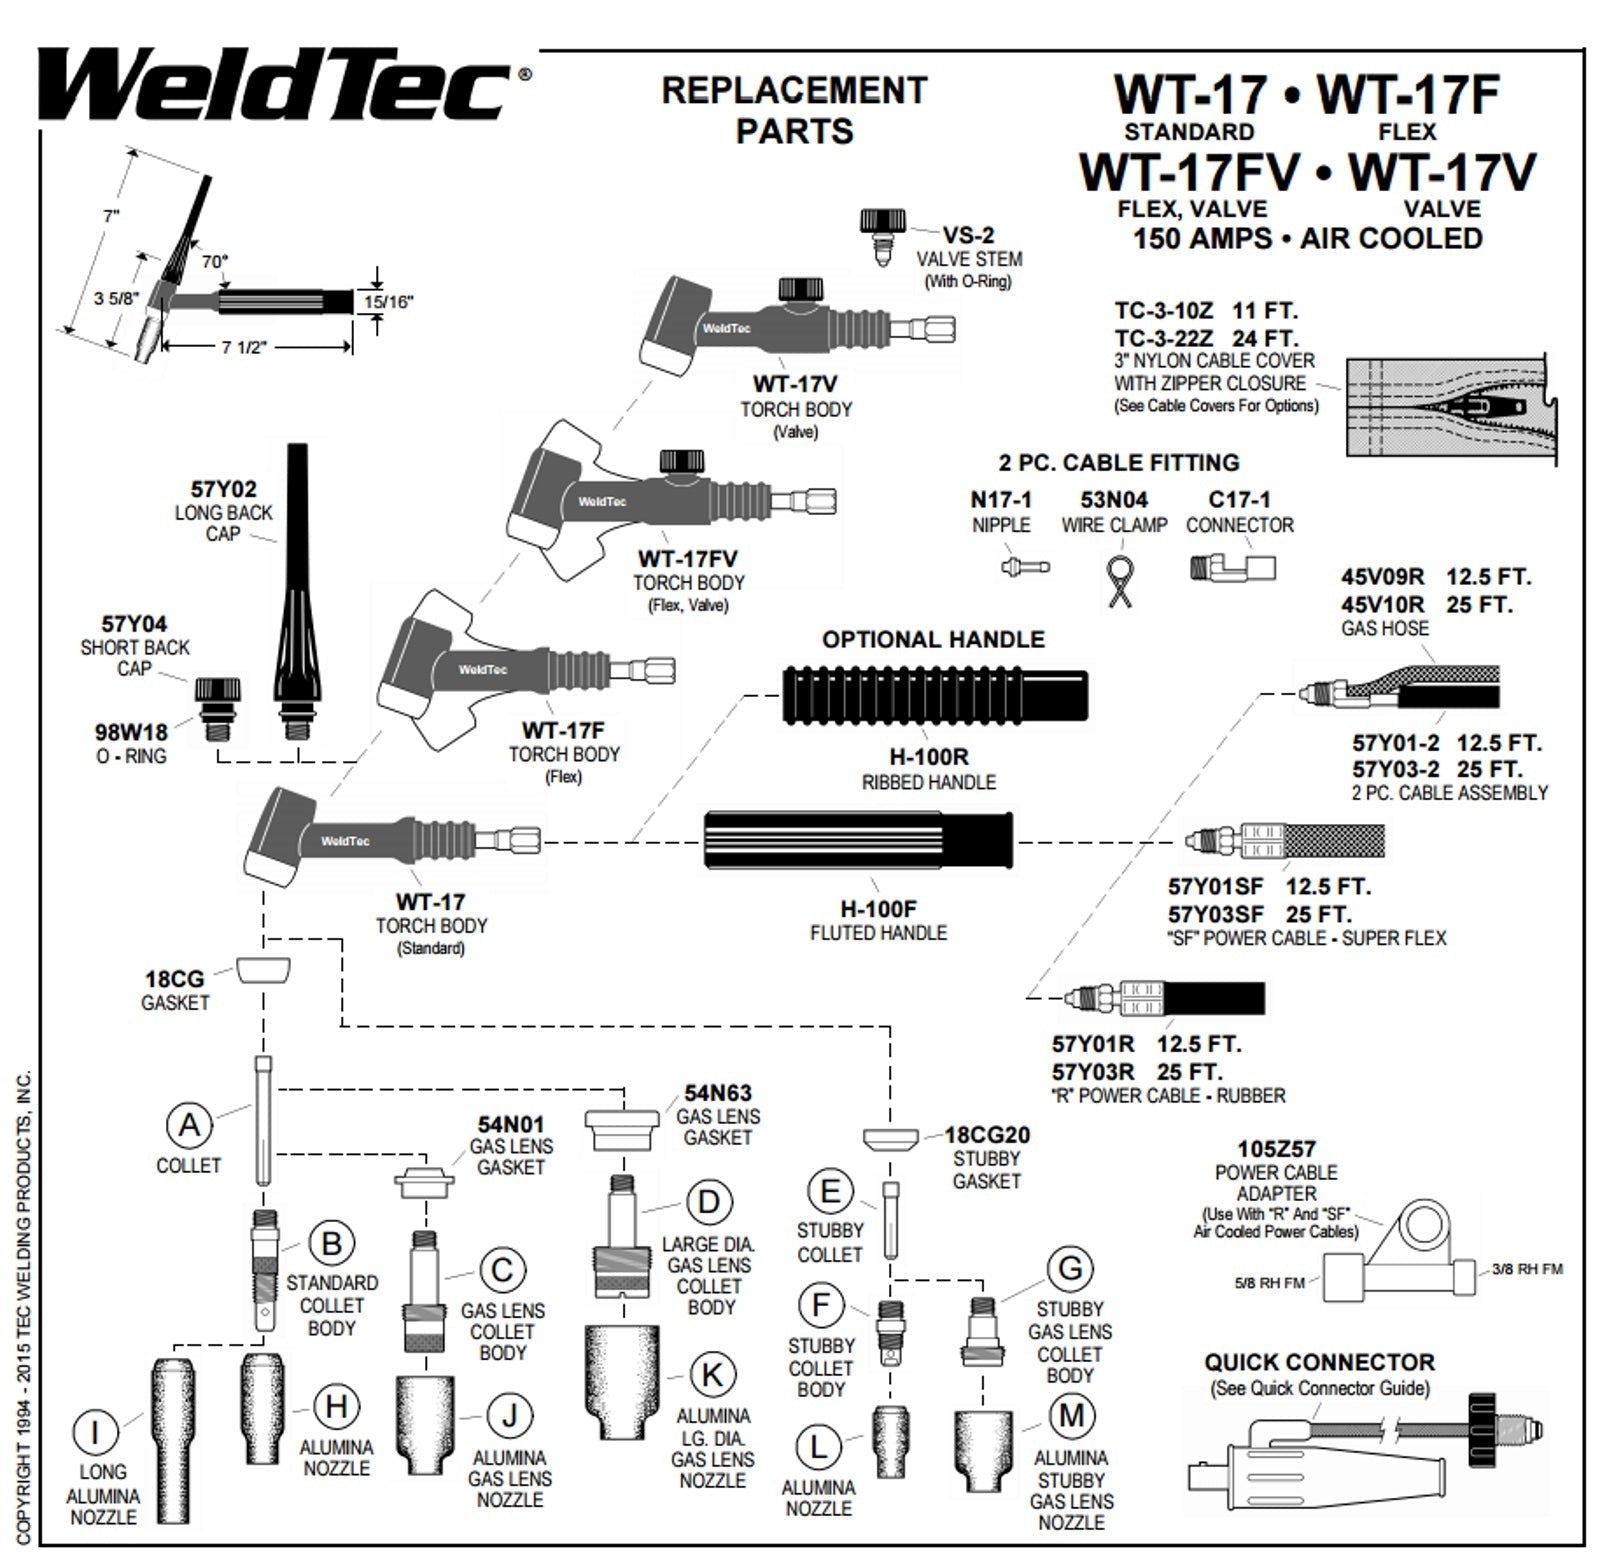 Weldtec 150 Amp Air Cooled TIG Torch with V 25' (WT-17V-25R)